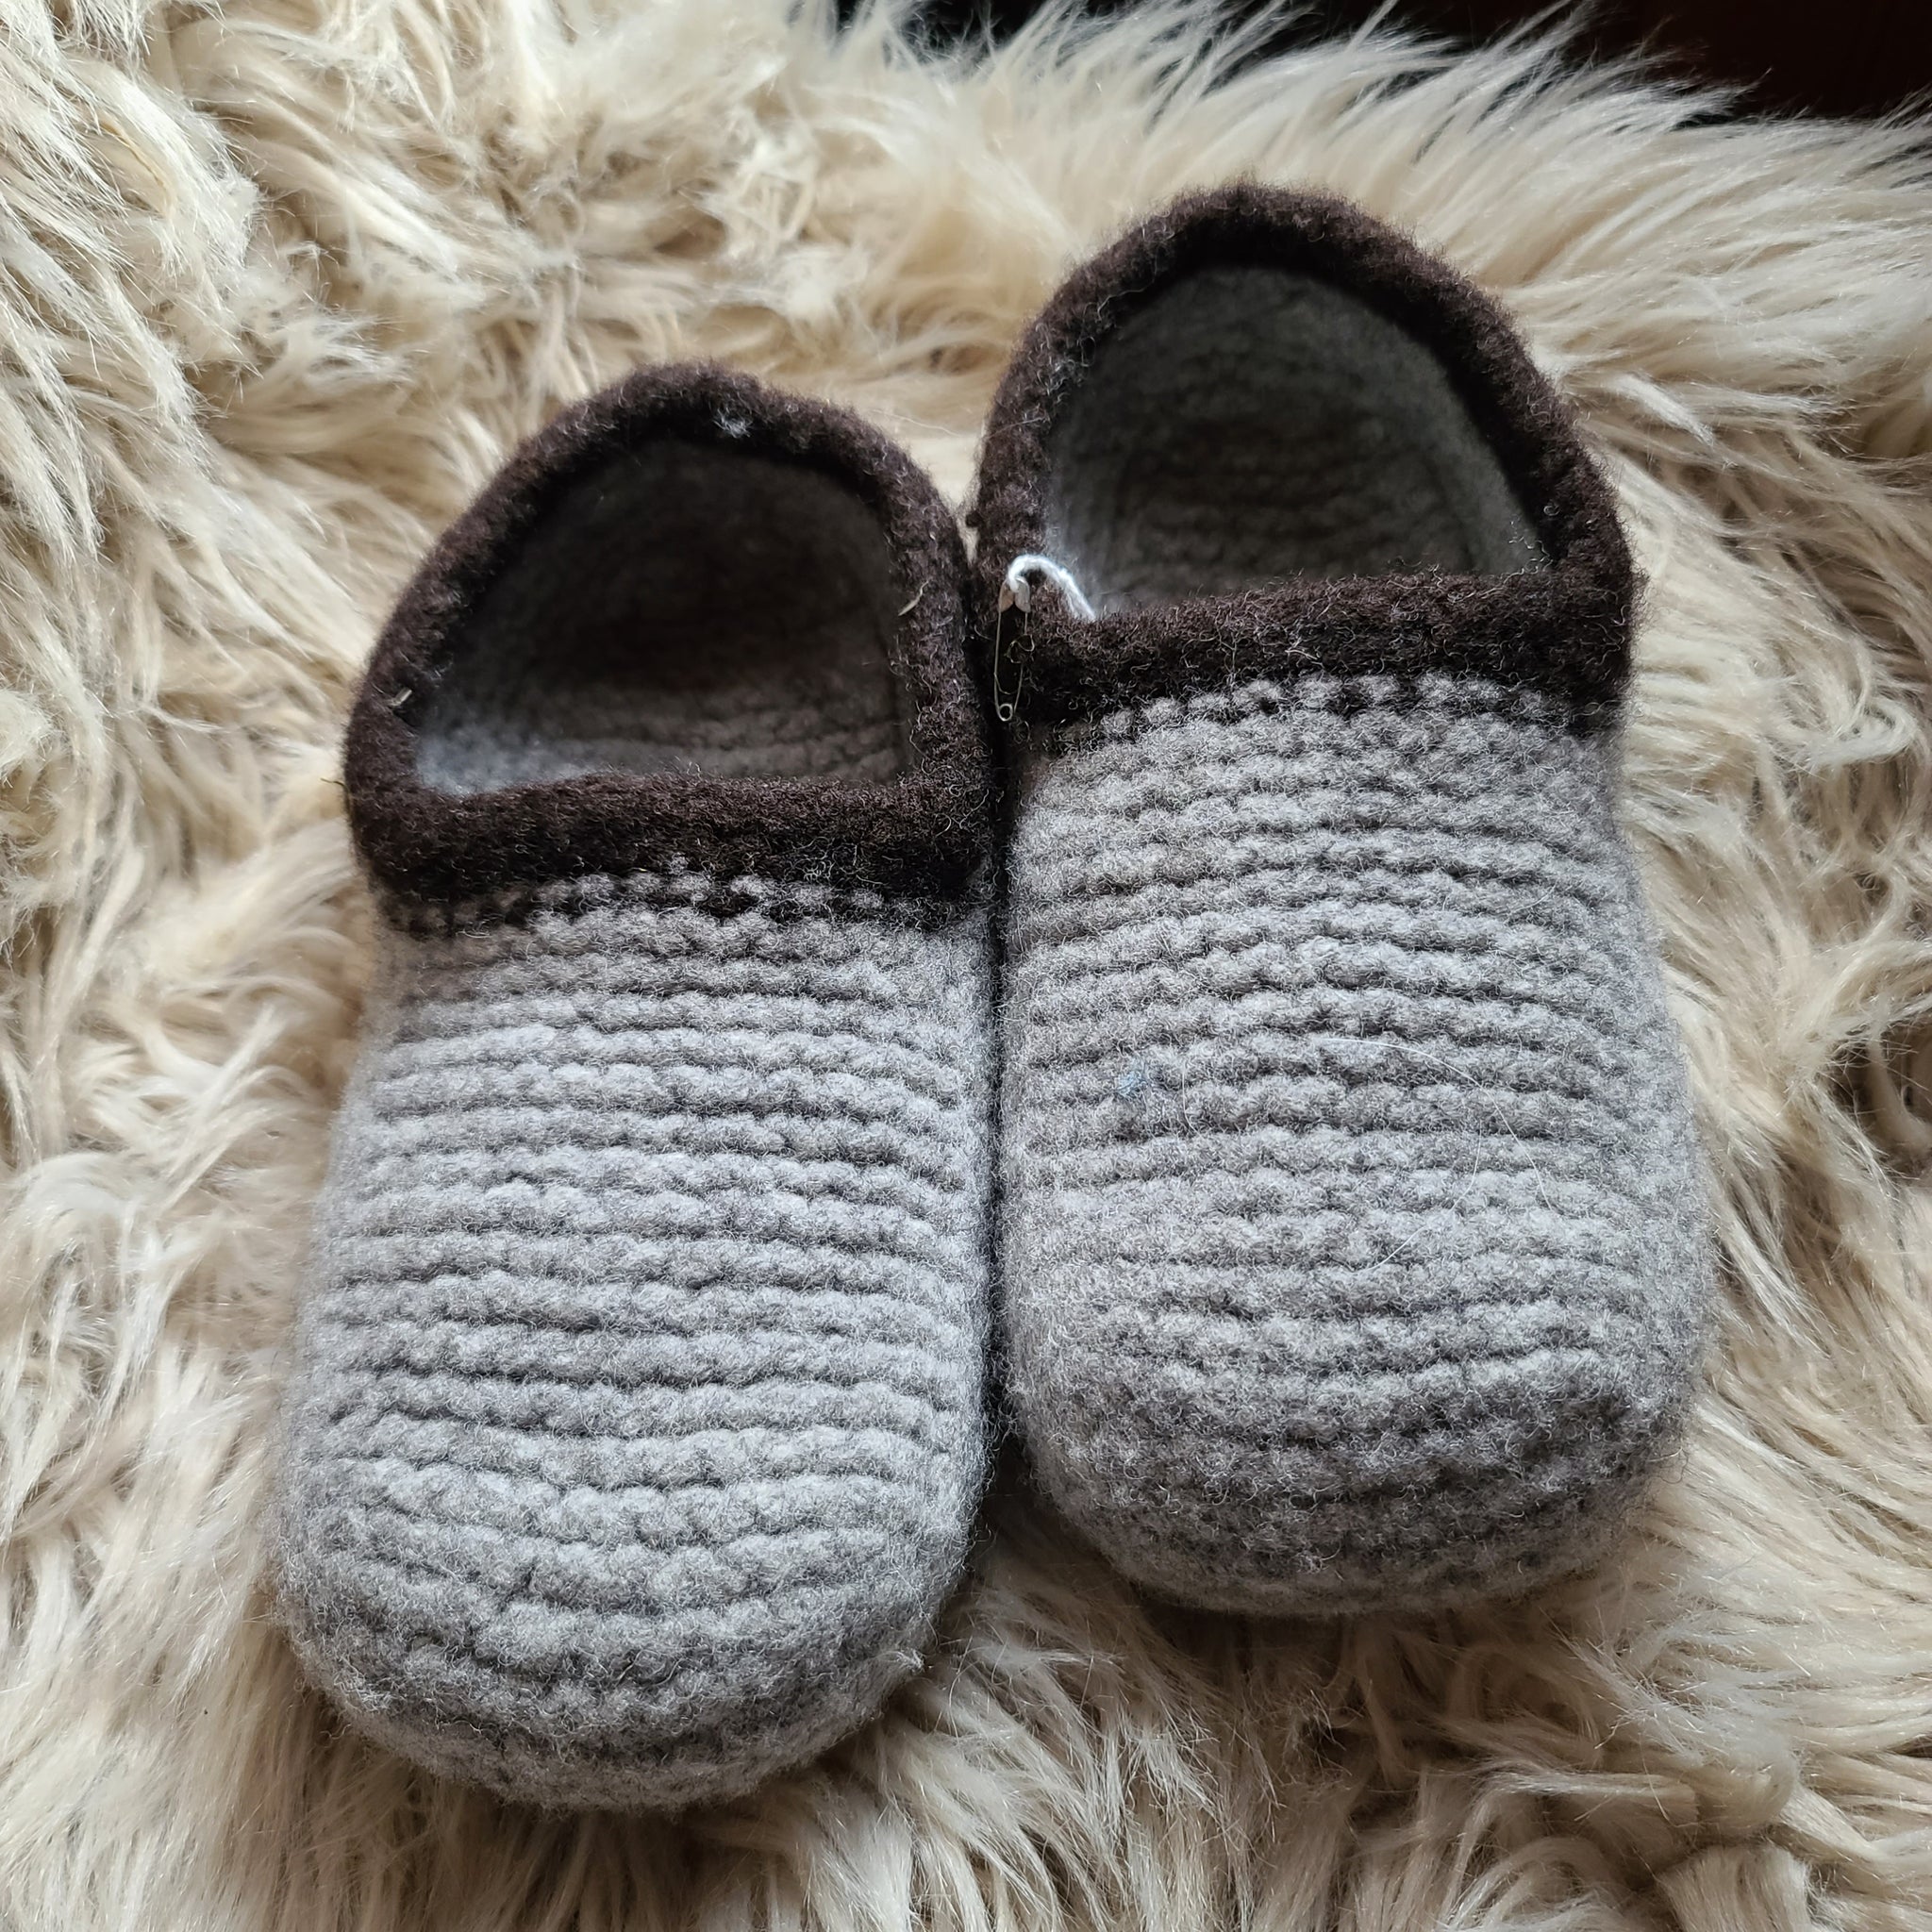 Felted Slippers Pattern